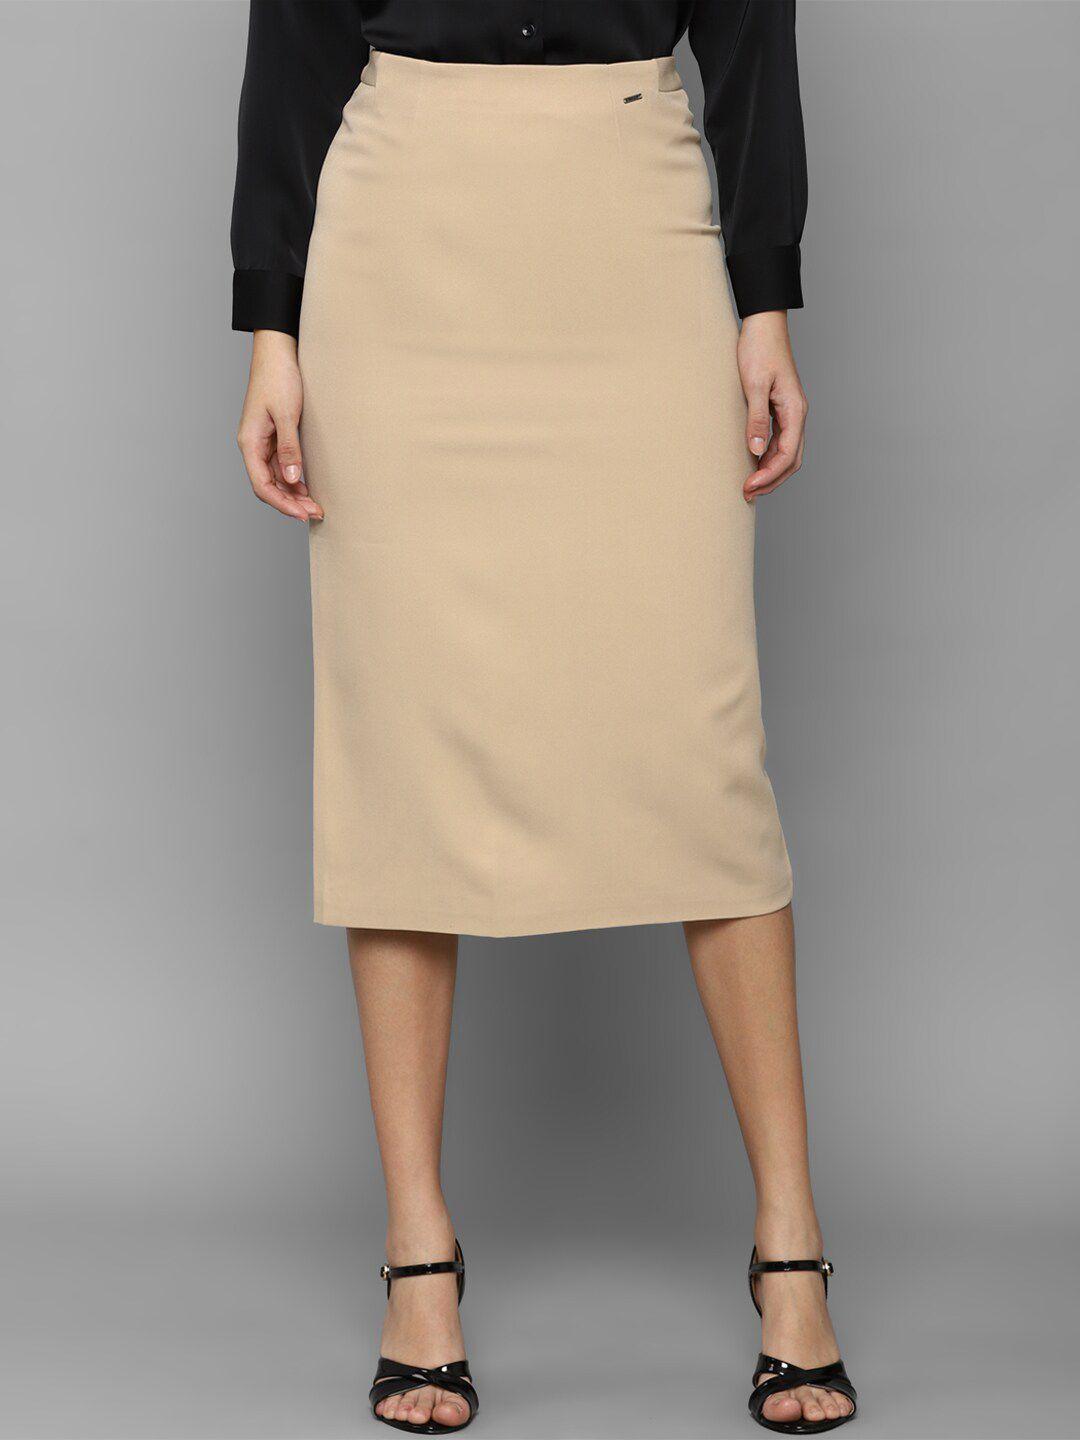 allen-solly-woman-khaki-solid-pencil-skirts